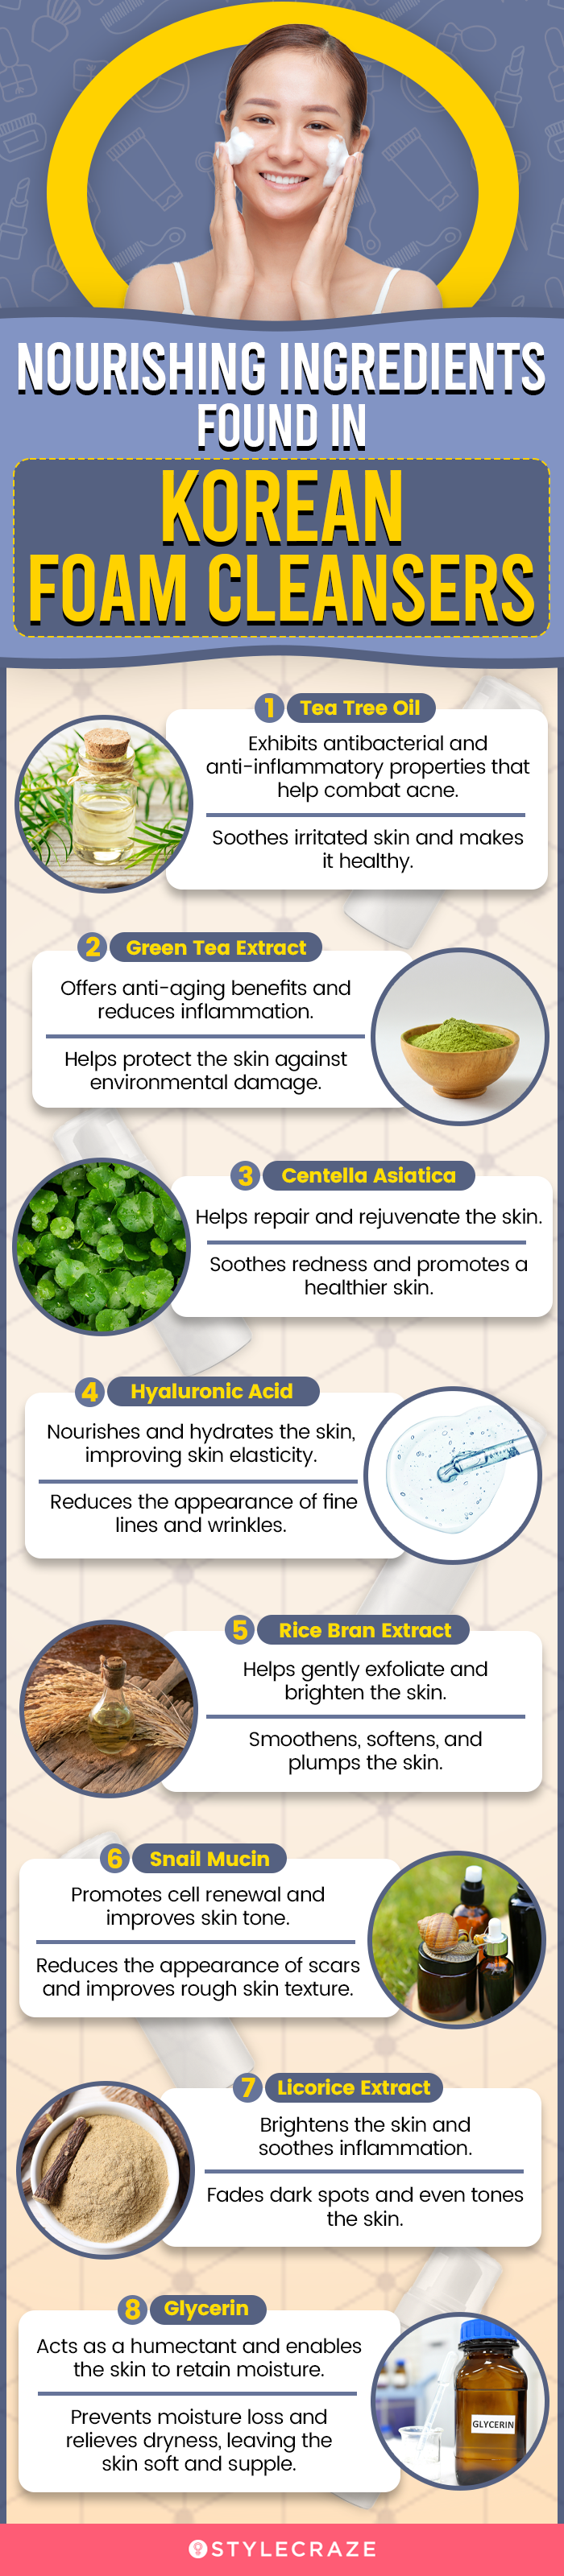 Nourishing Ingredients To Look For In Korean Foam Cleansers (infographic)